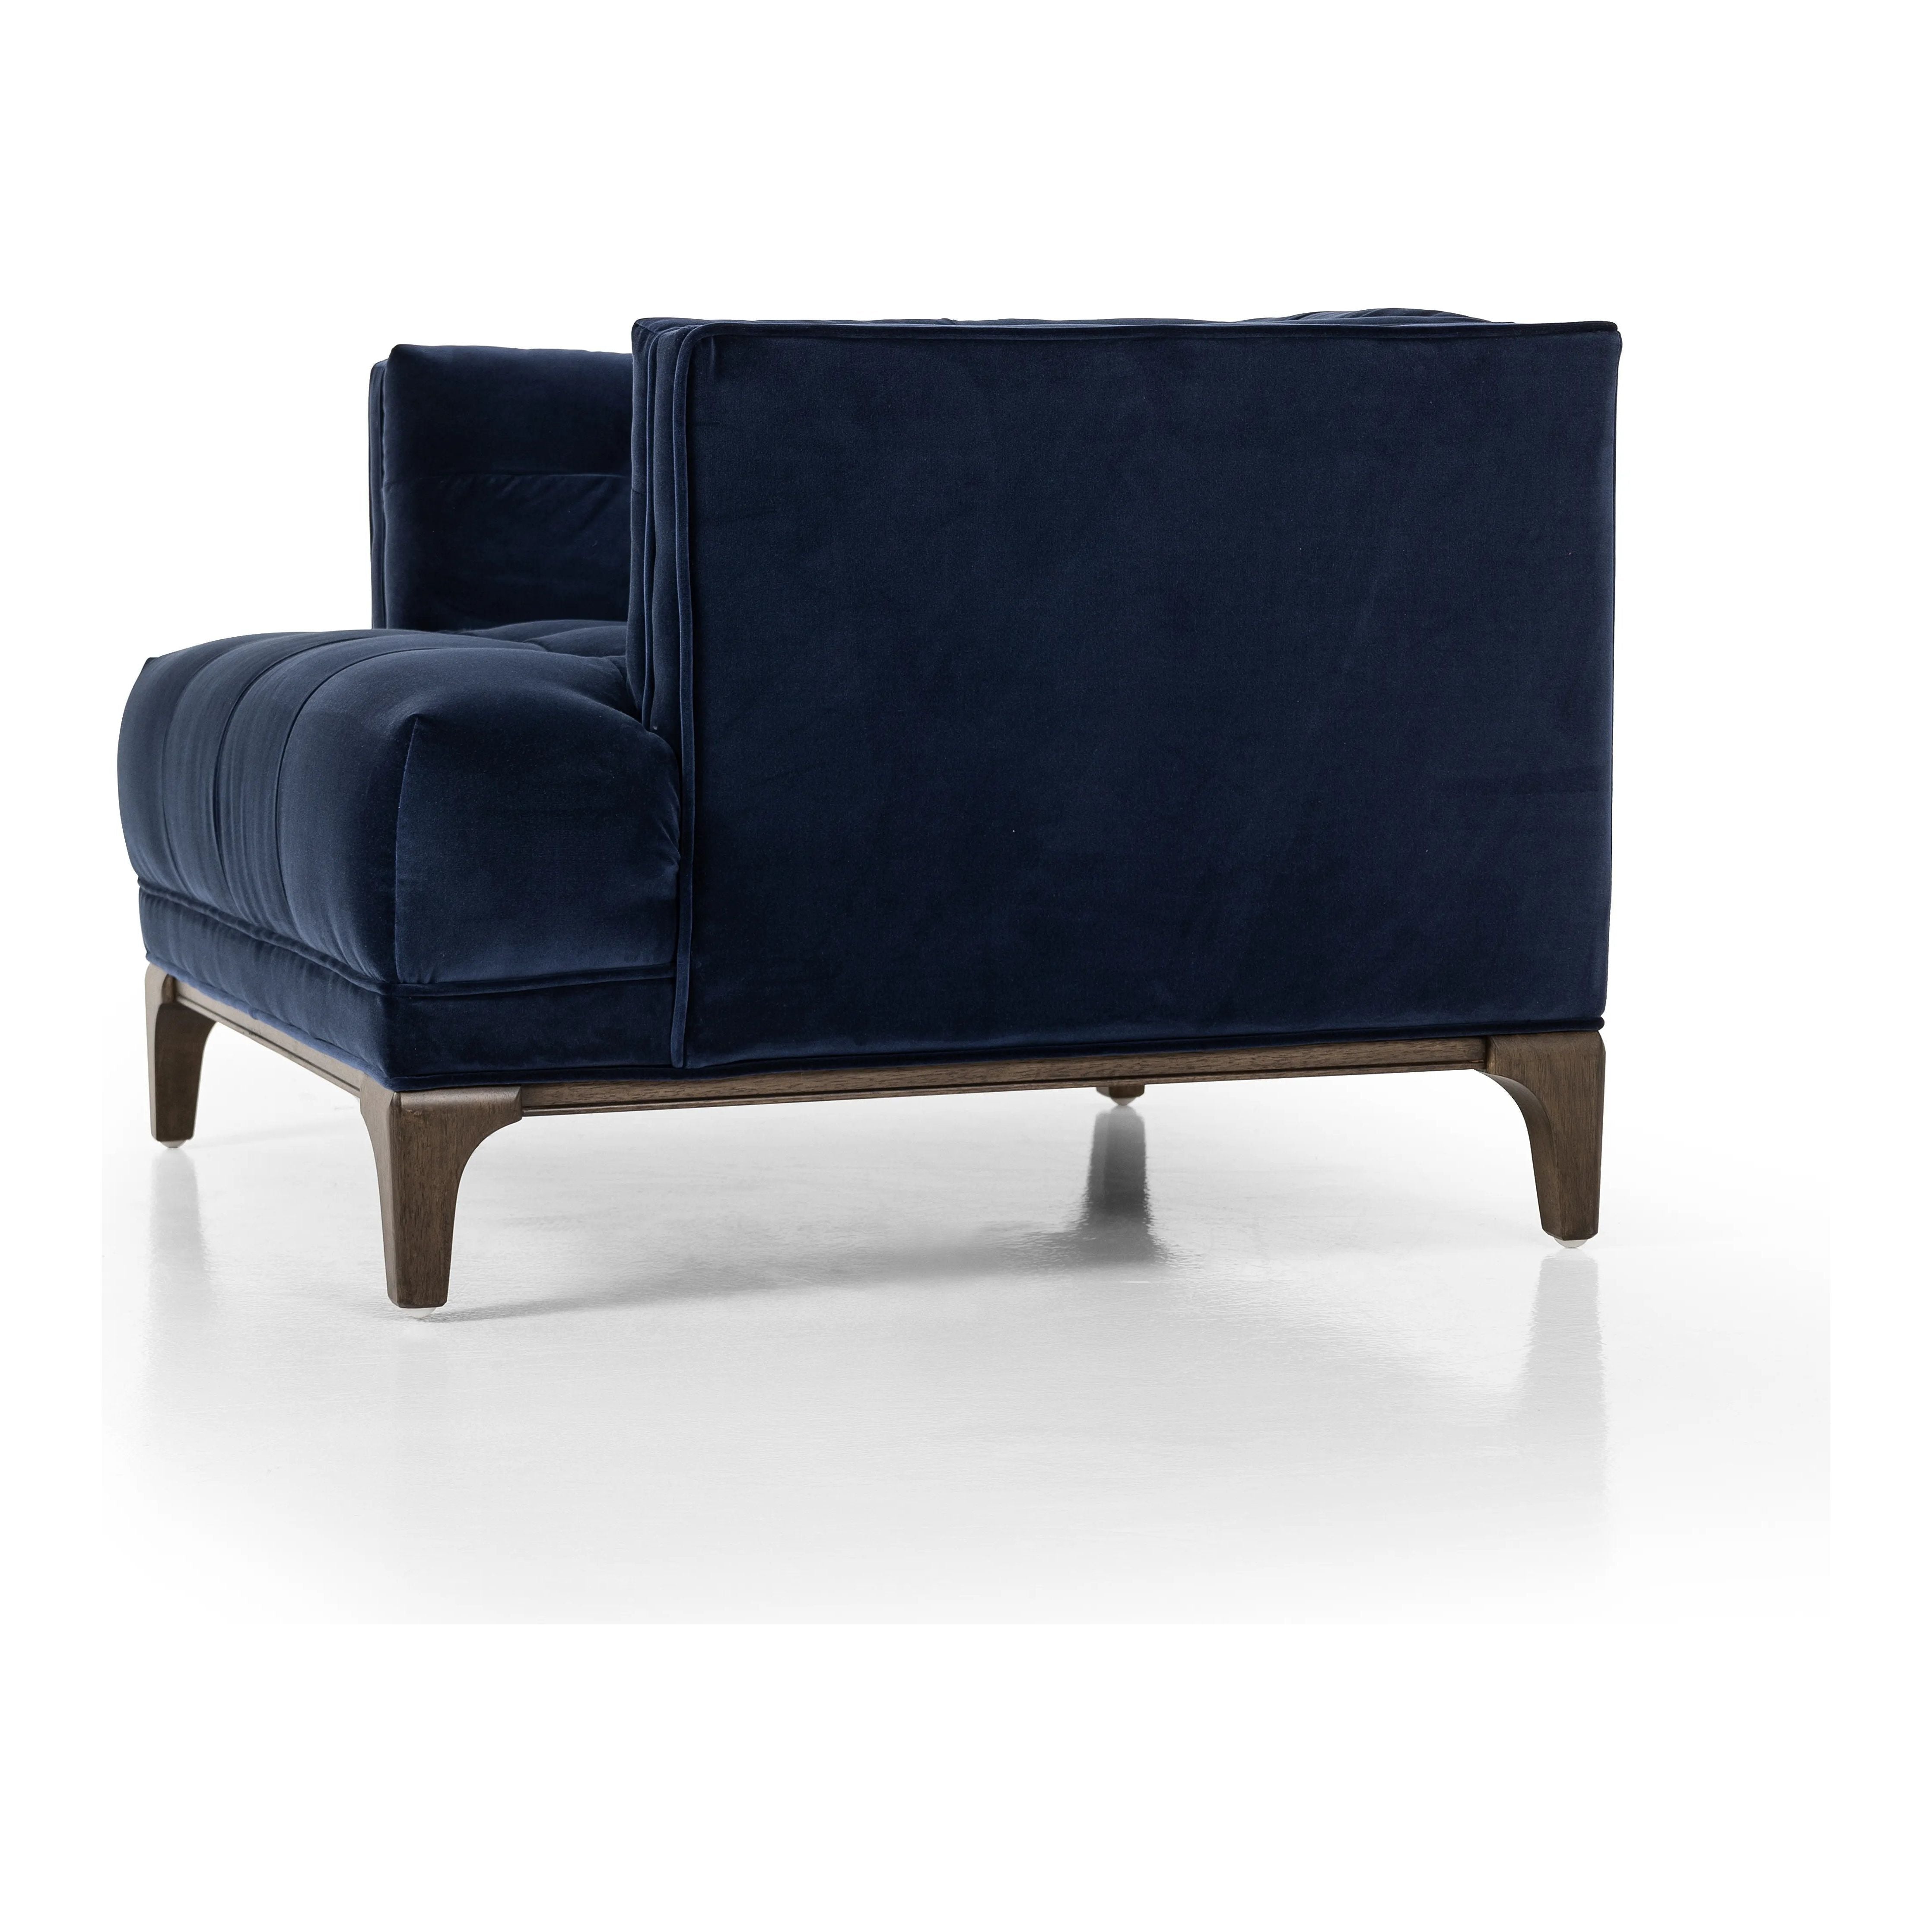 This low, tailored midcentury silhouette is upholstered in a velvety navy fabric, with dramatic blind tufting for texture.Collection: Kensingto Amethyst Home provides interior design, new home construction design consulting, vintage area rugs, and lighting in the Charlotte metro area.